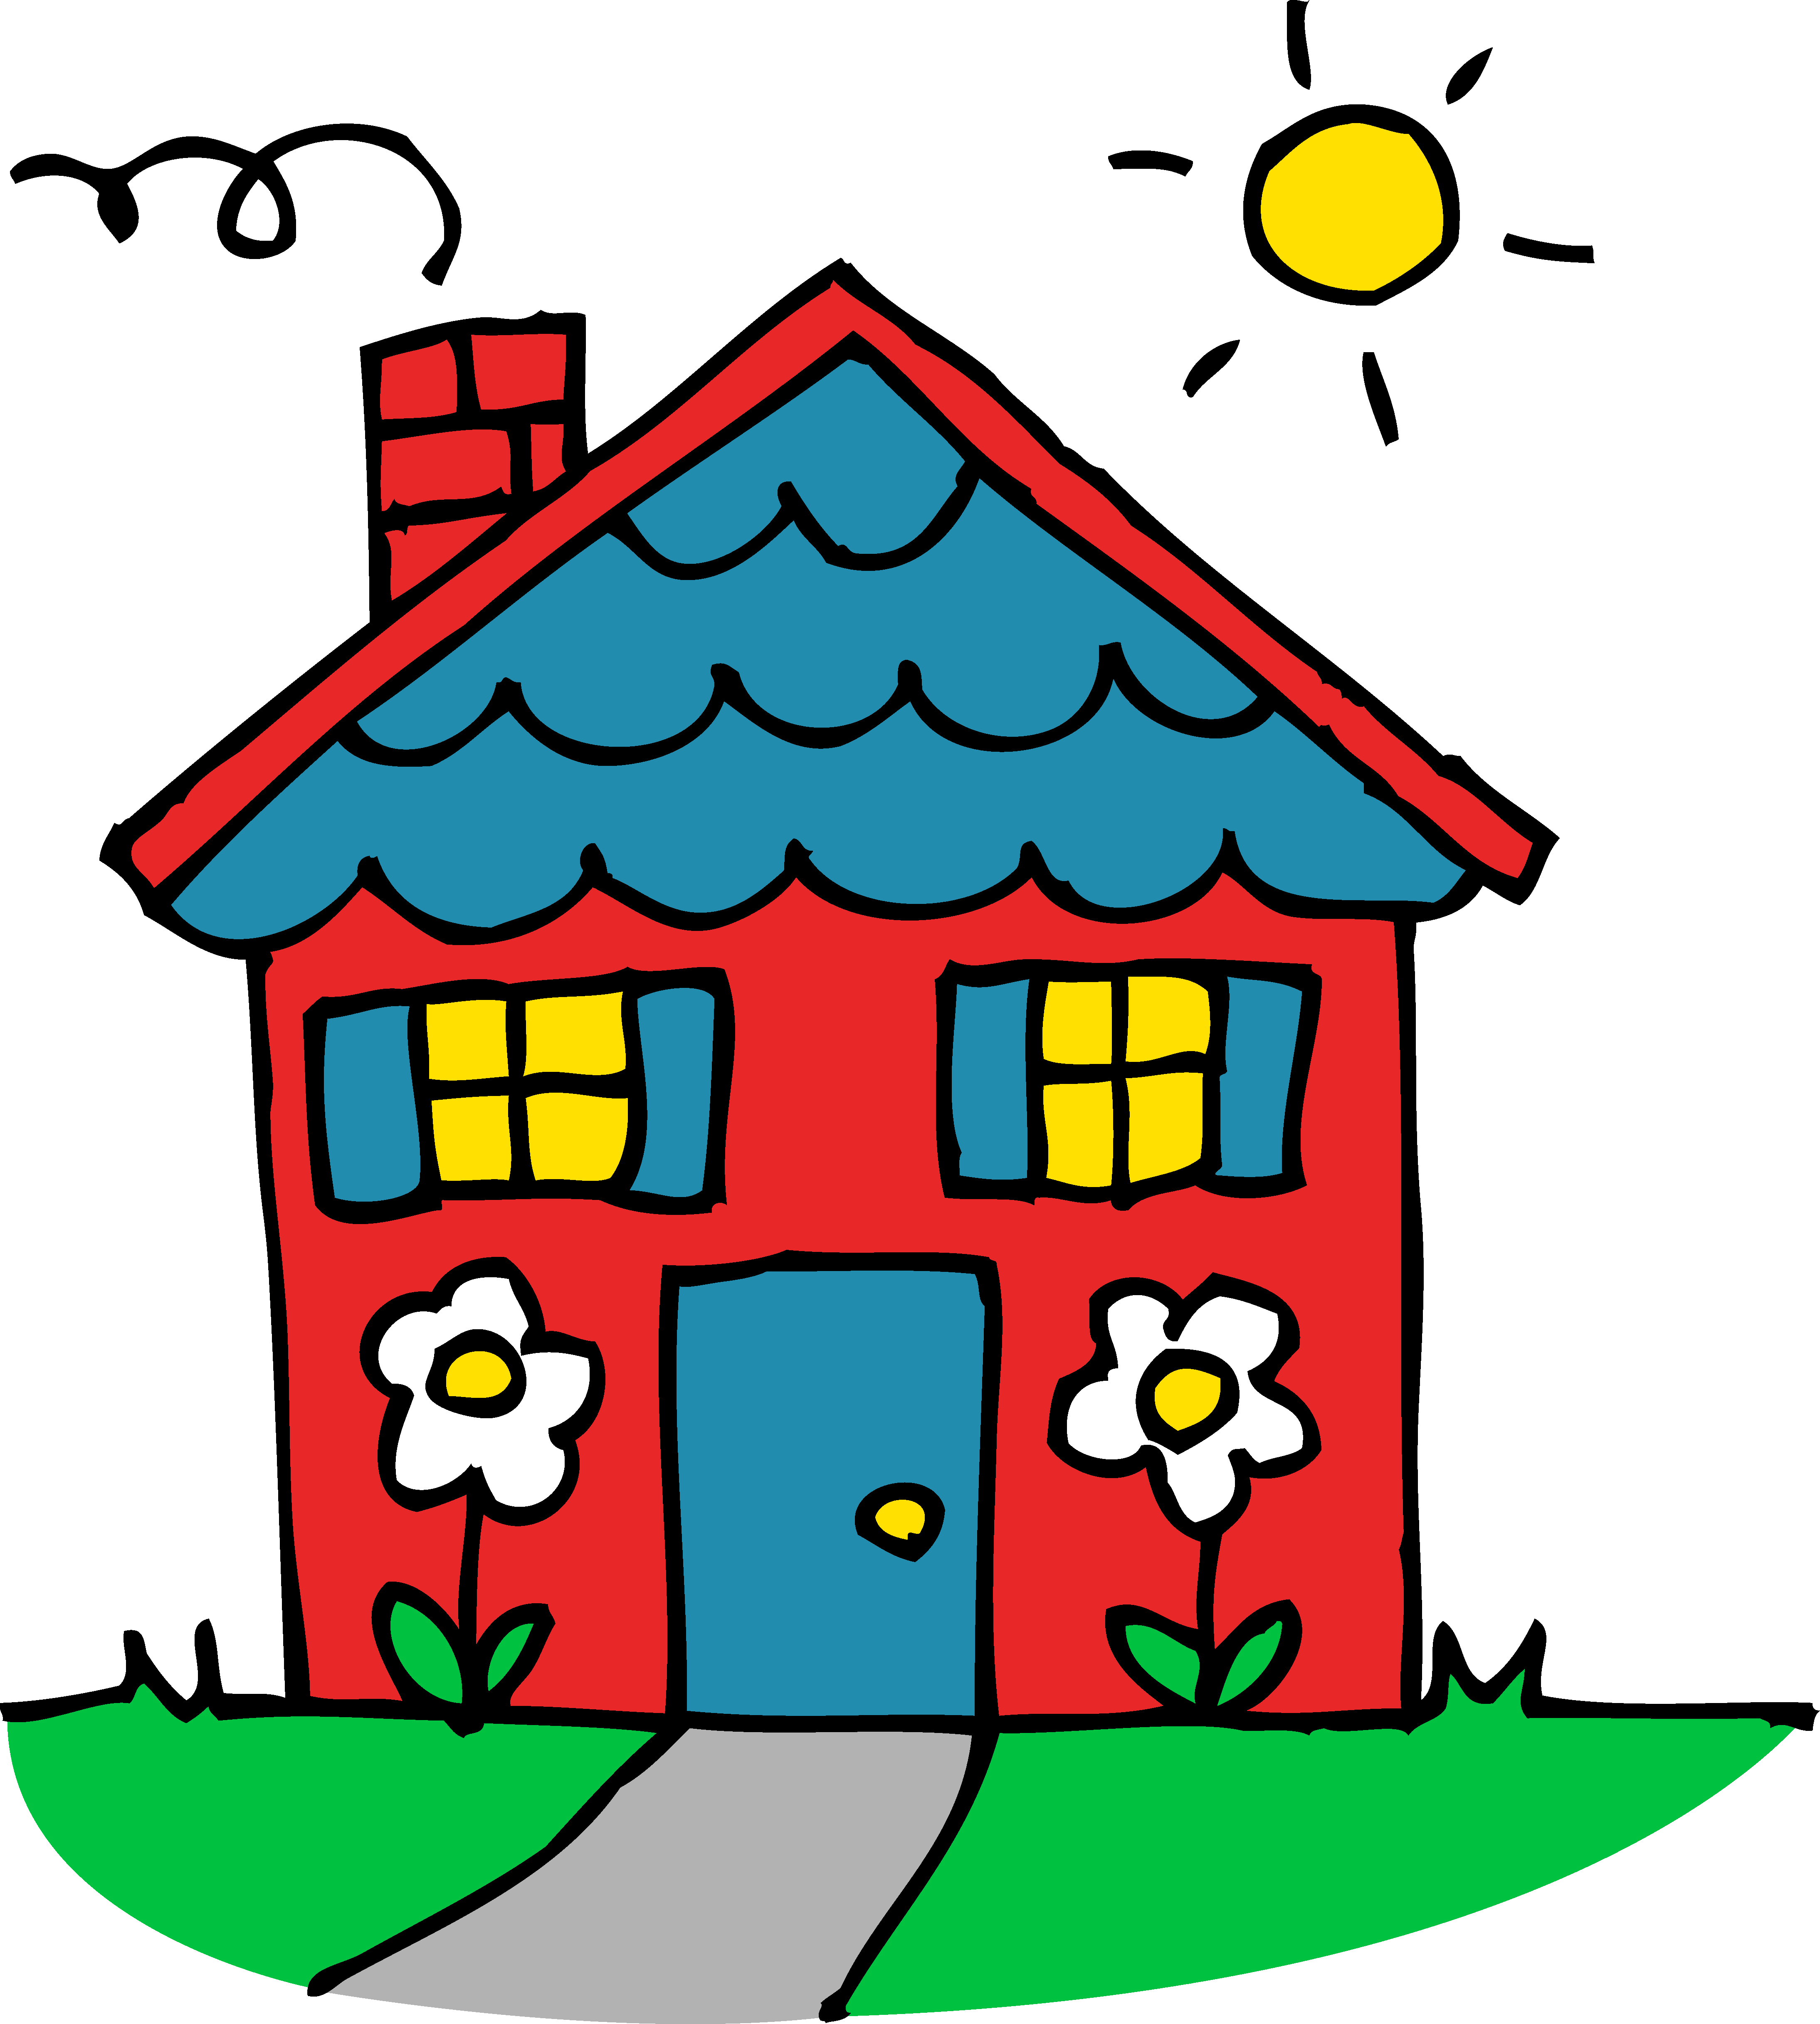 House Clipart craft projects, Building Clipart - Clipartoons